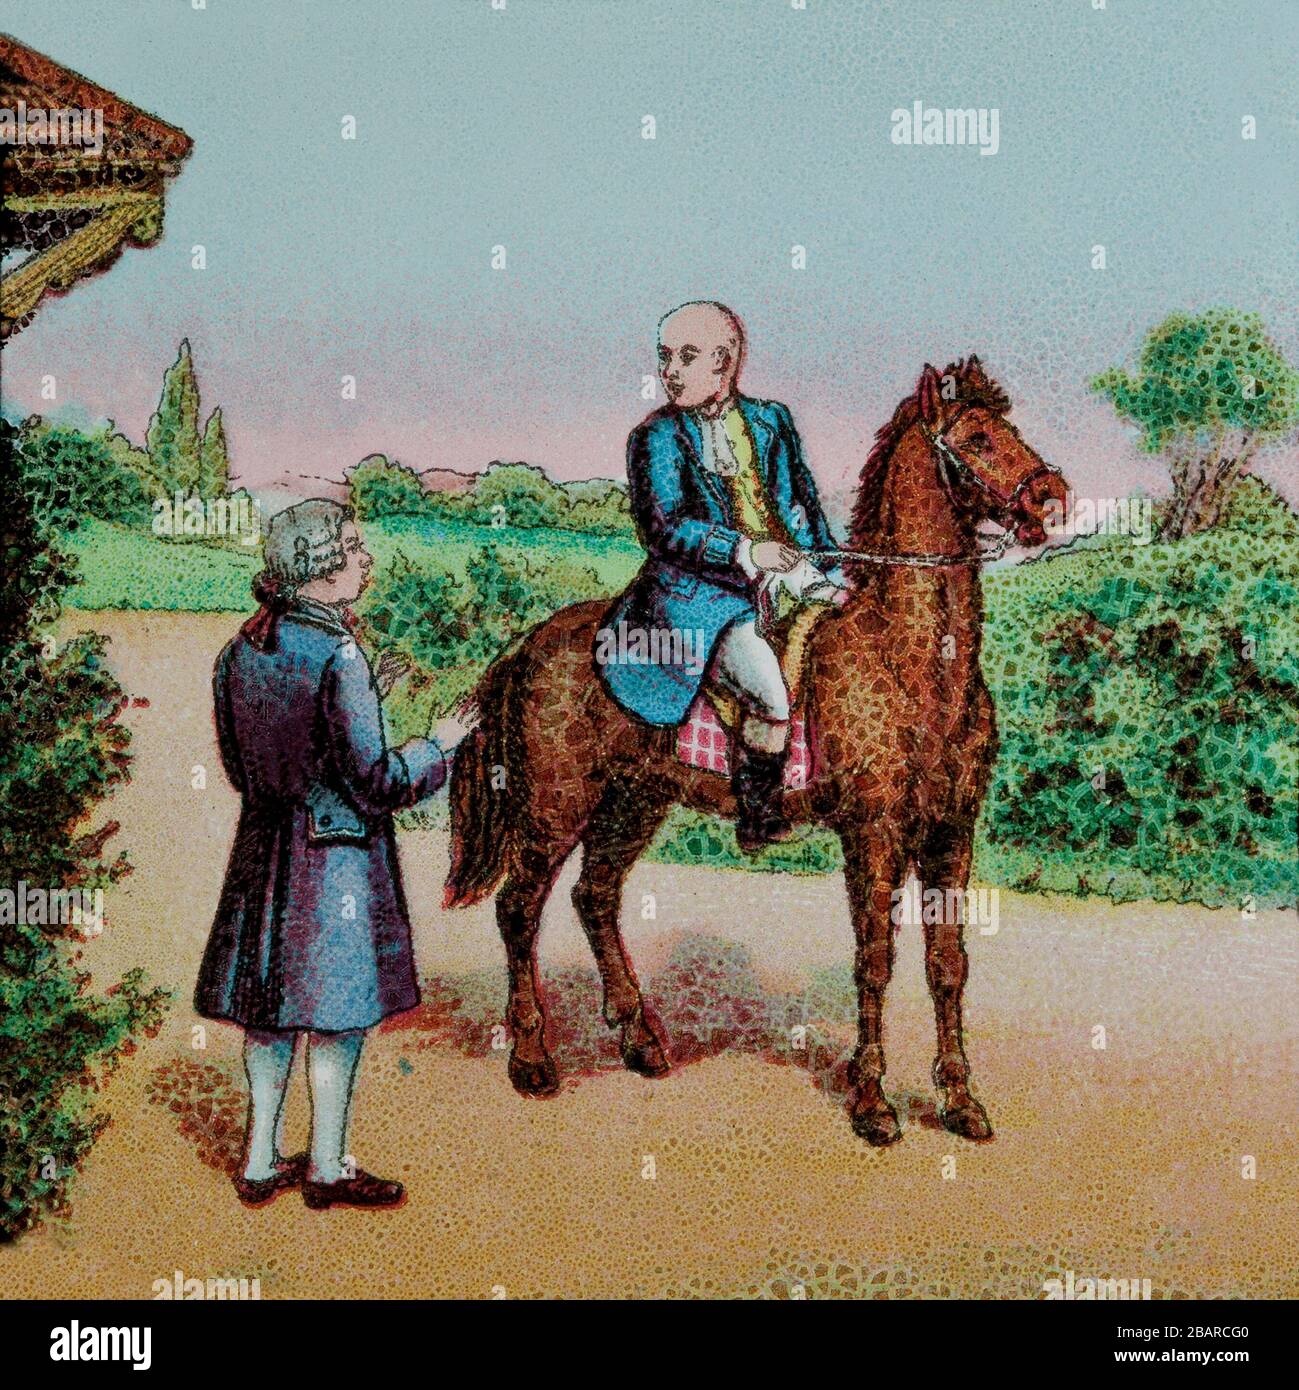 The Diverting History of John Gilpin, an illustration of a historical man on horse back riding to the Bell Inn in Edmonton but being diverted to a place called 'Ware' by accident.  John Gilpin was known a 'Draper' a story by William Cowper in 1782. Stock Photo